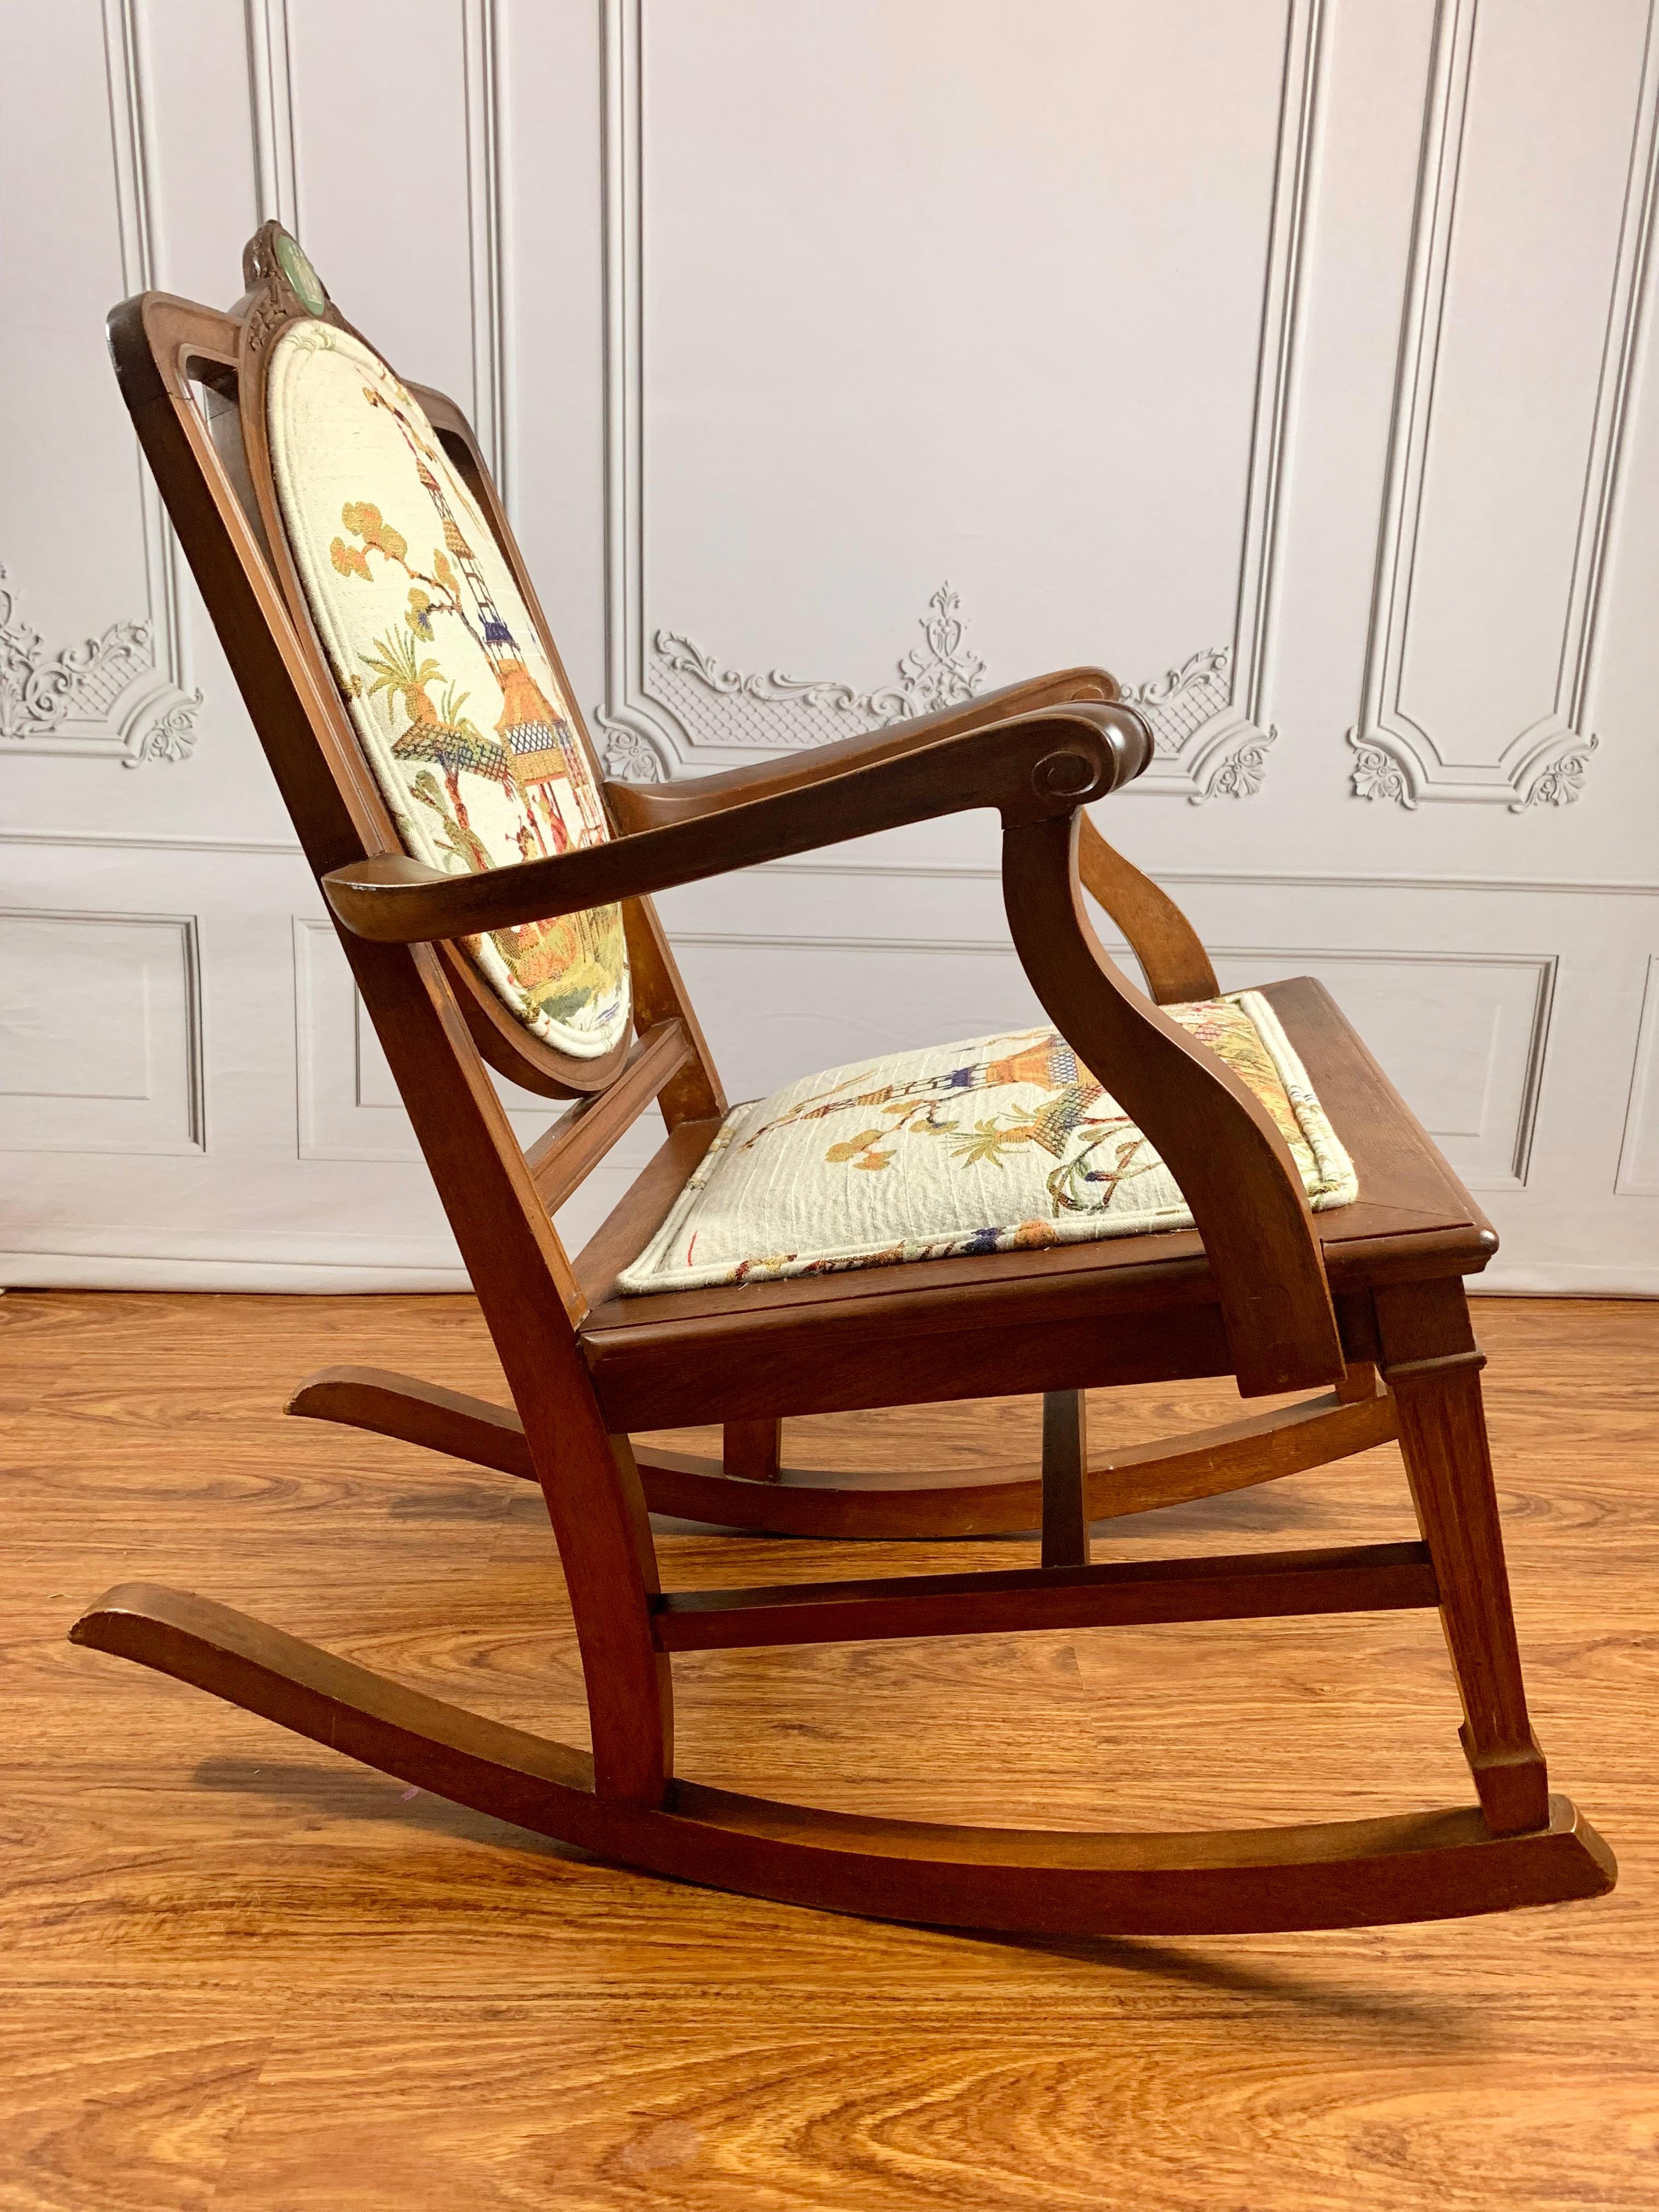 Antique English Chinoiserie Upholstered Rocking Chair w/ Wedgwood Medallion For Sale 1